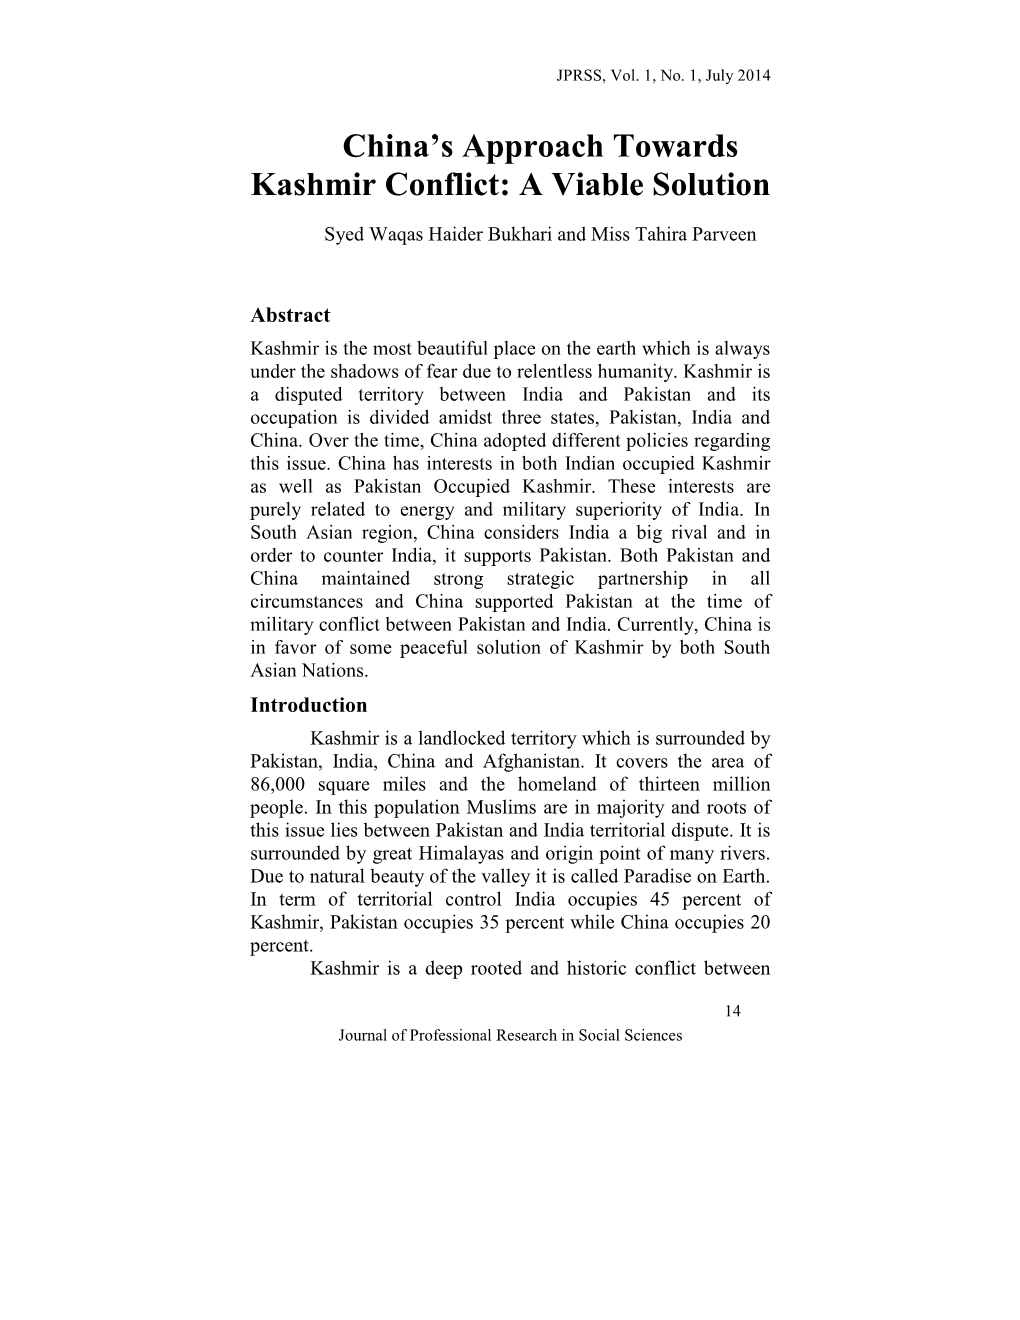 China's Approach Towards Kashmir Conflict: a Viable Solution